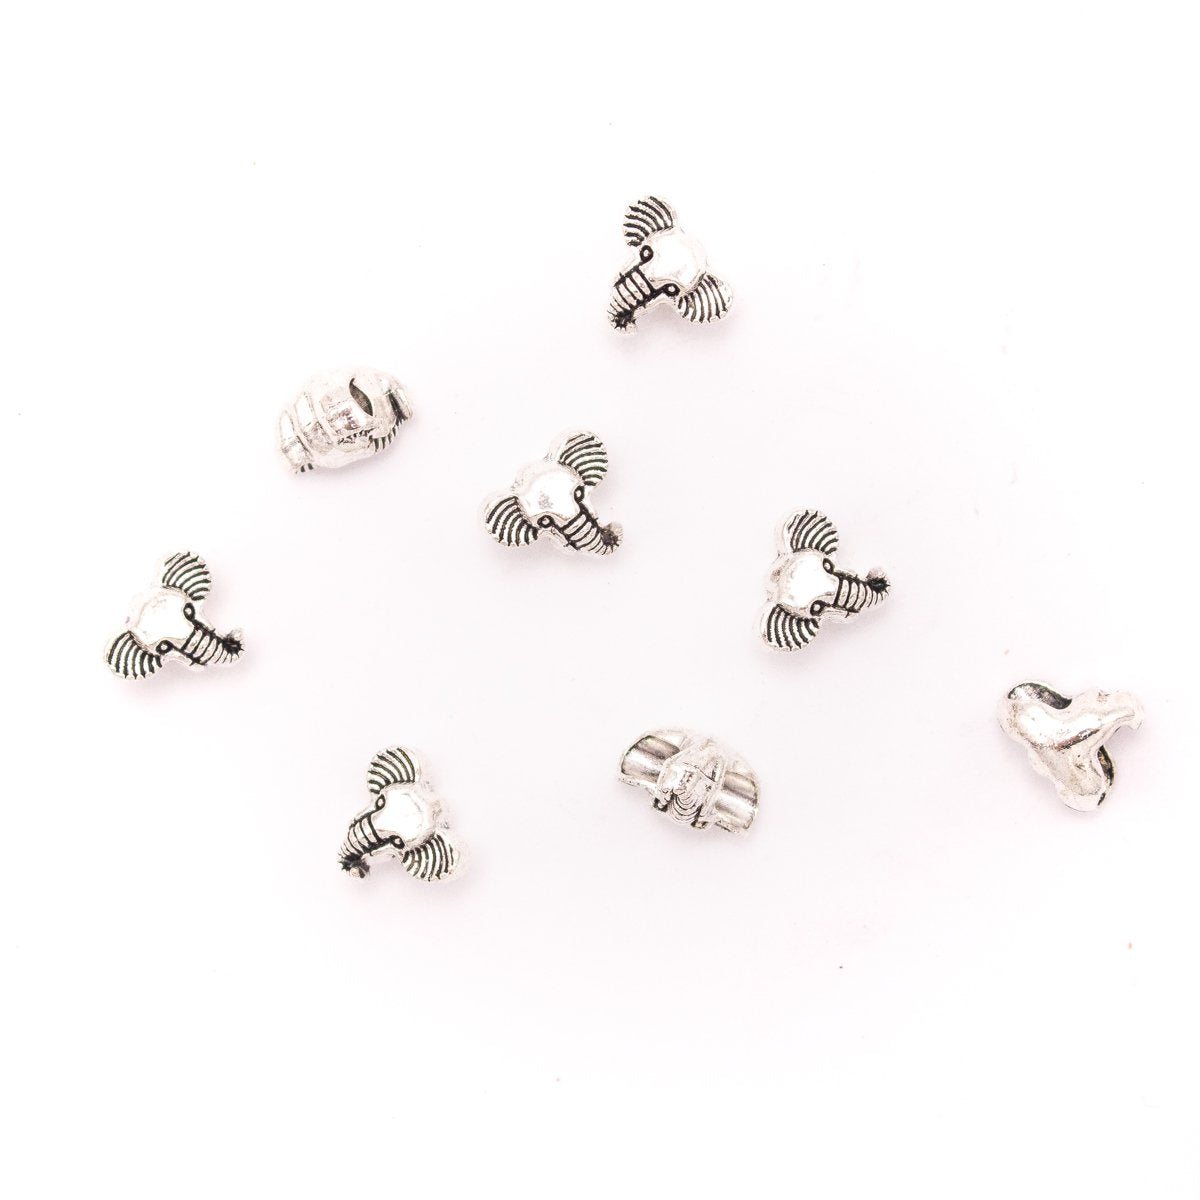 20Pcs for 3mm round silver Elephant beads findings for bracelet handmade finding jewelry supplies jewelry finding D-5-3-136